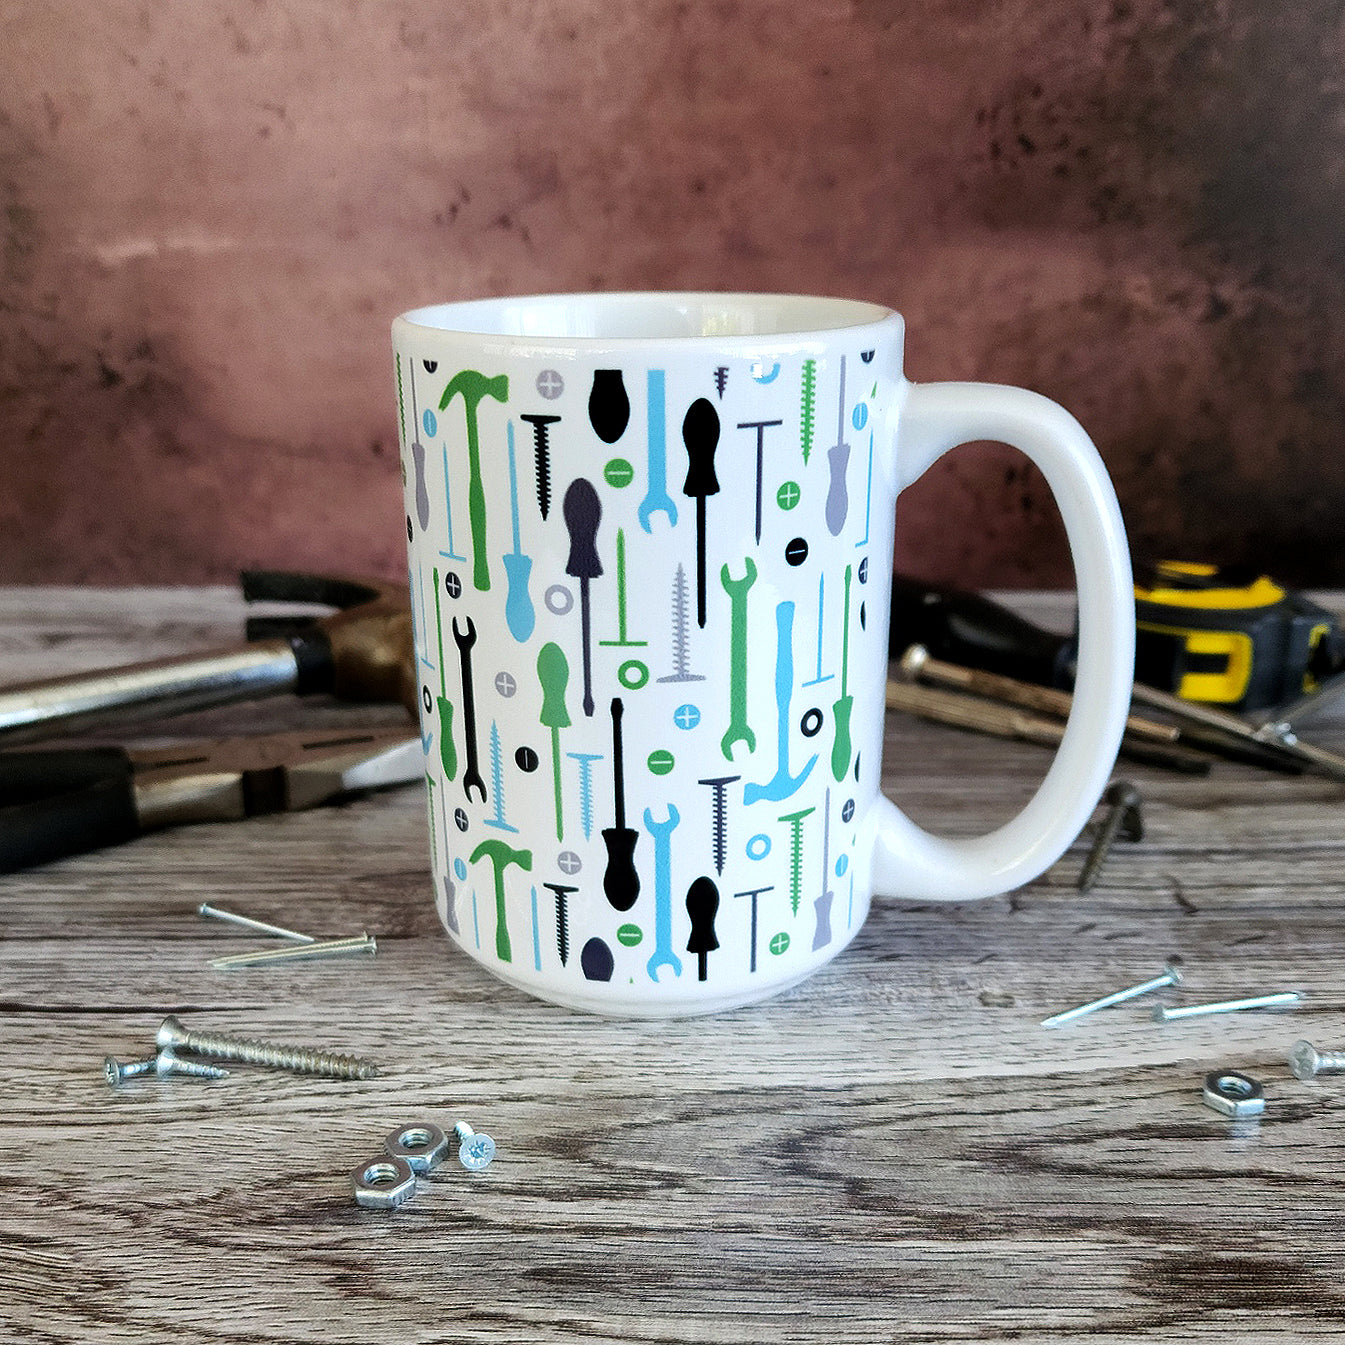 Green Blue Tools Pattern Mug (15oz on work bench with tools round it) at Amy's Coffee Mugs. A ceramic coffee mug with a modern style pattern of tools in green, blue, black, and gray over white that wraps around the mug to the handle. Perfect for any handyman or contractor. 